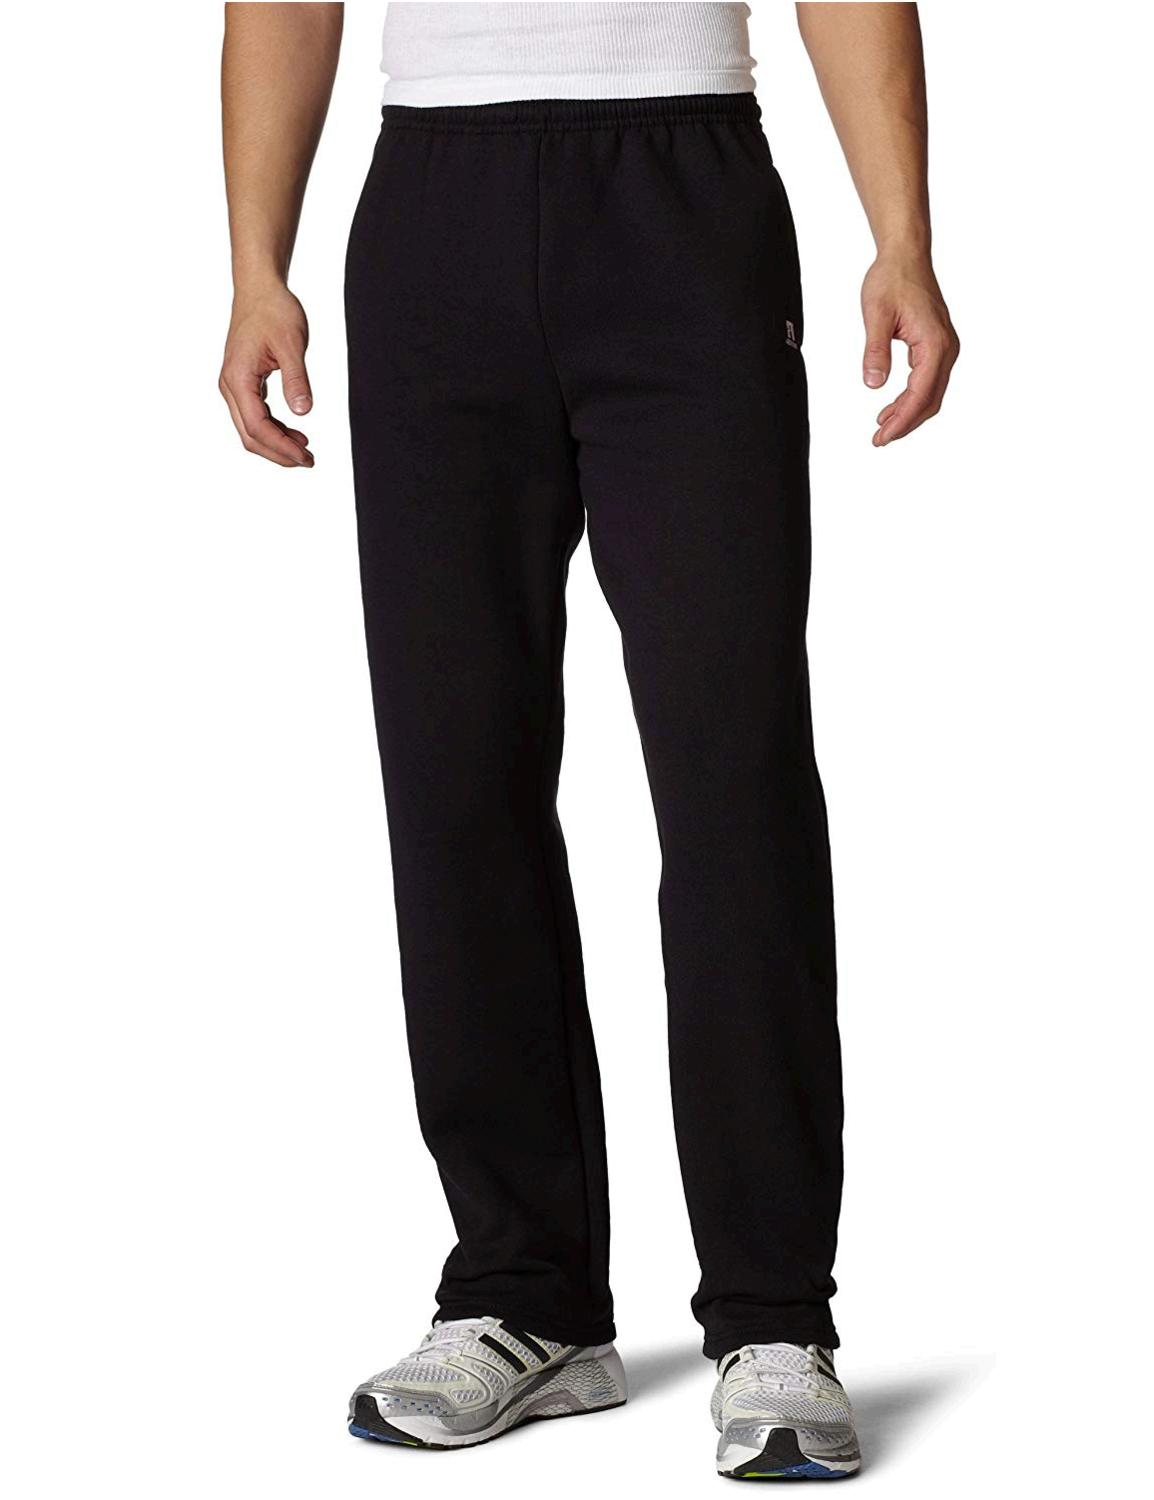 Russell Athletic Men's Dri-Power Open Bottom Sweatpants with, Black ...